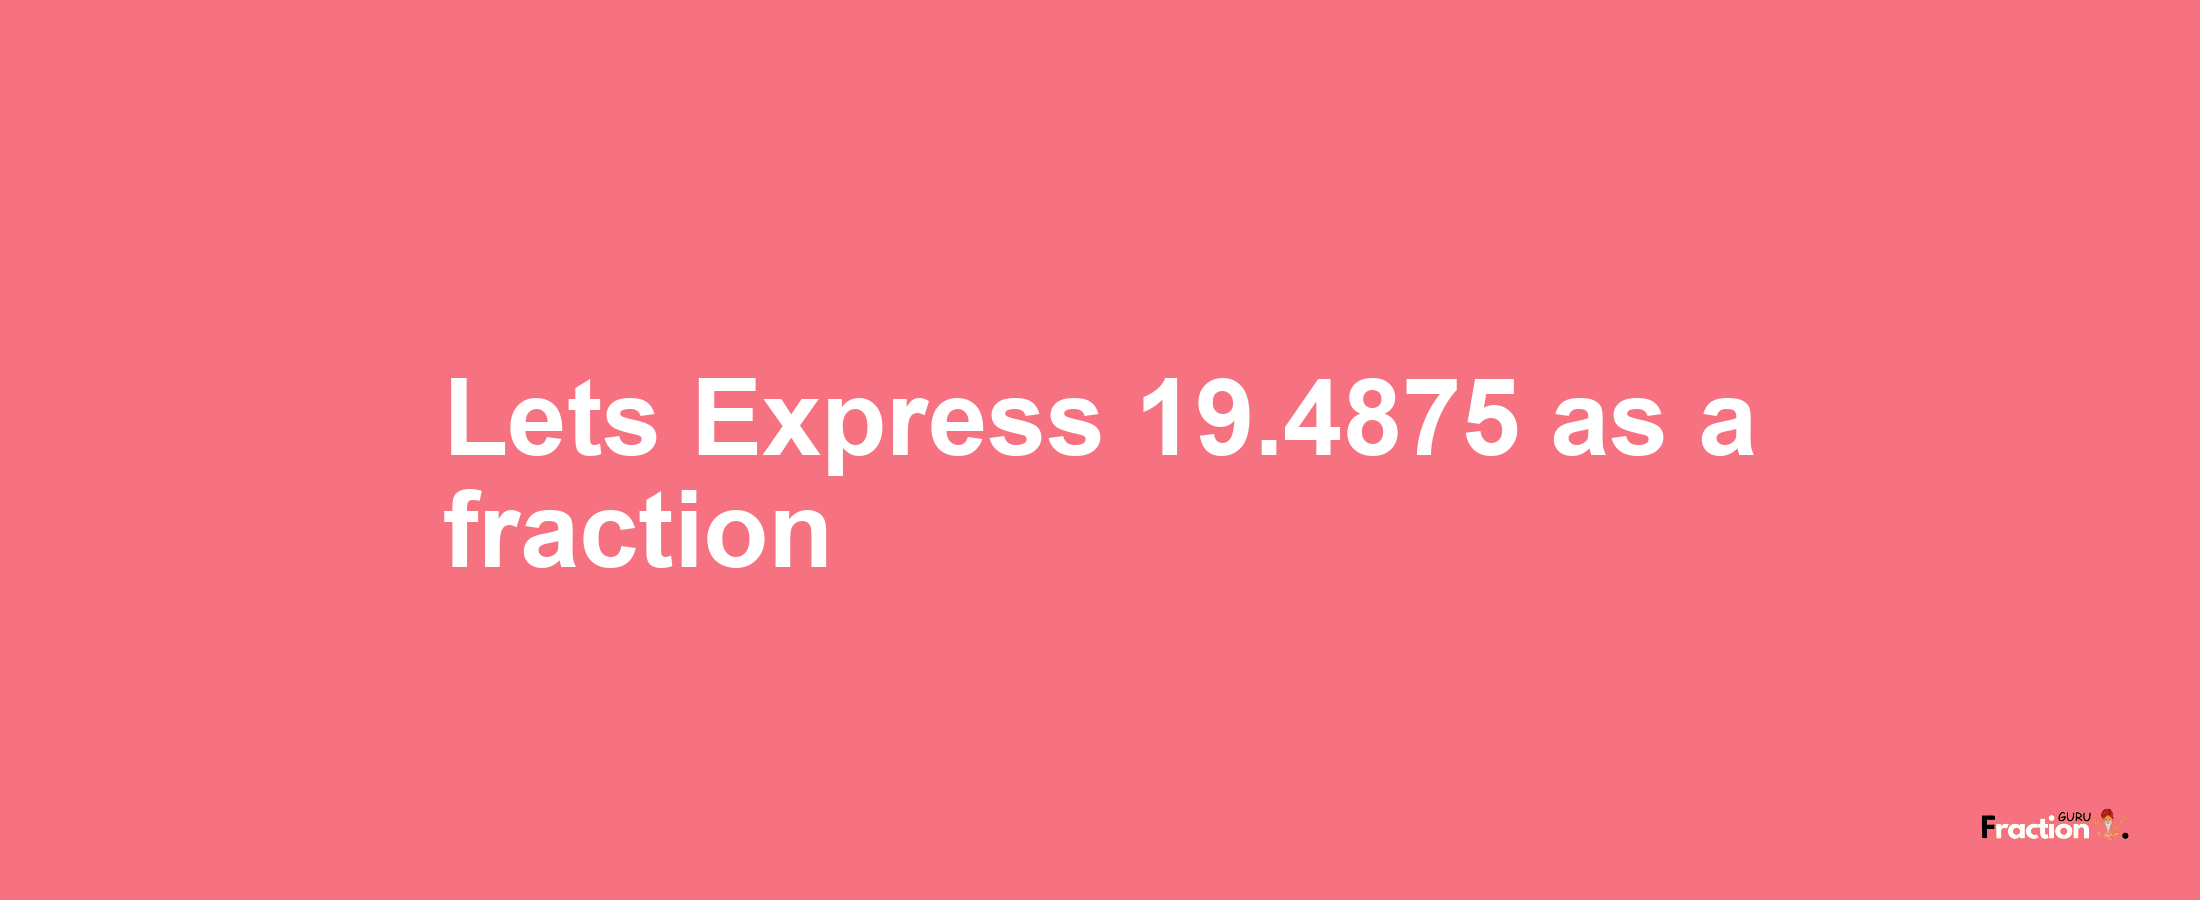 Lets Express 19.4875 as afraction